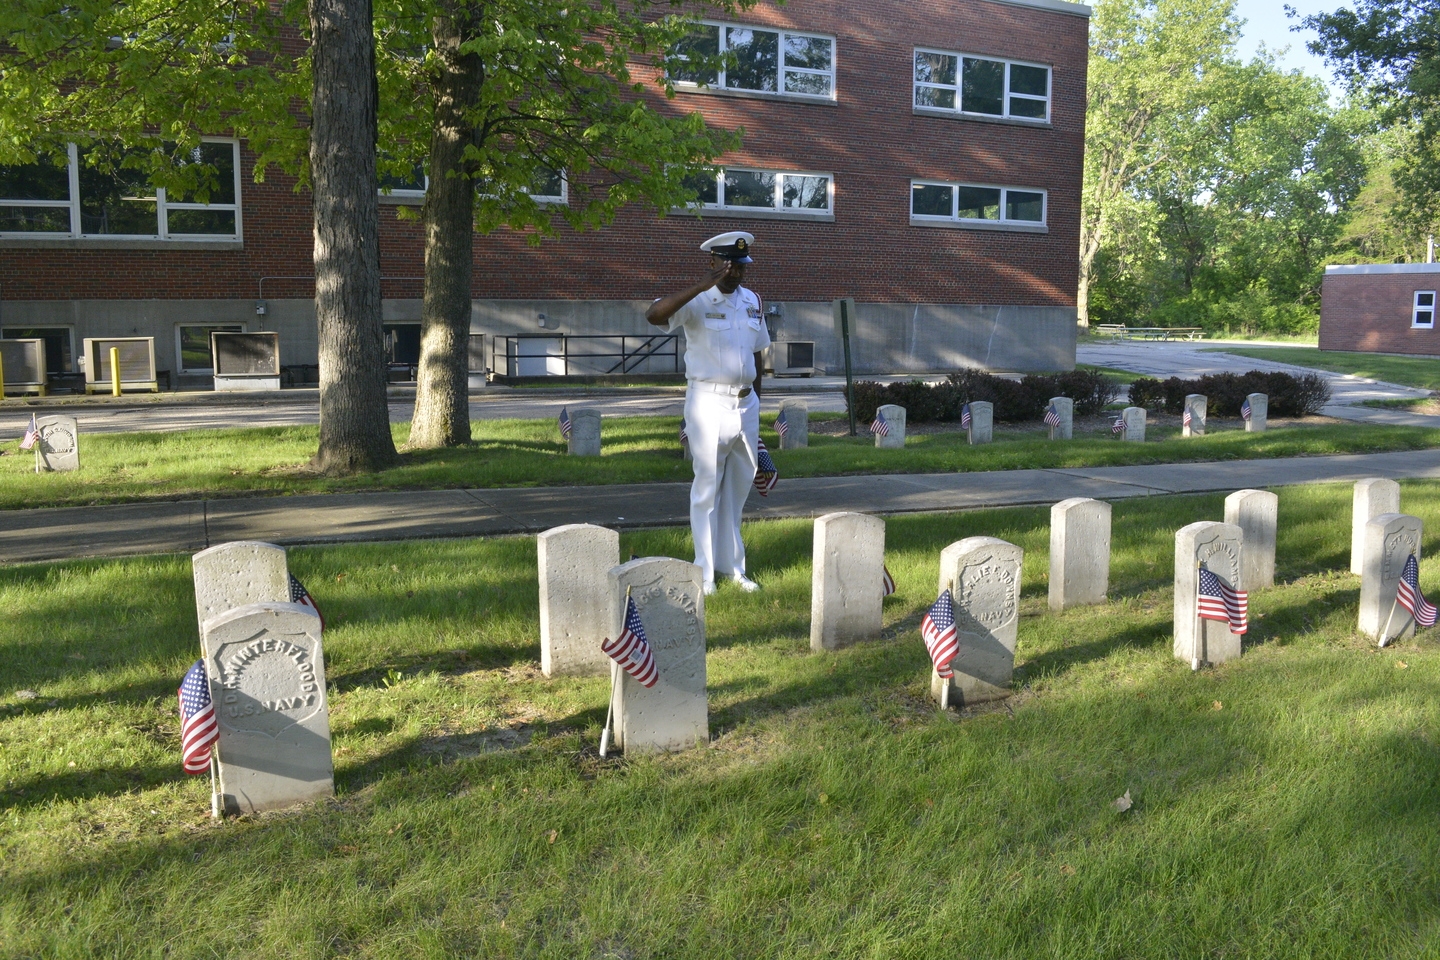 Member FCCM Gilling remembers our Sailors at Great Lakes Base.